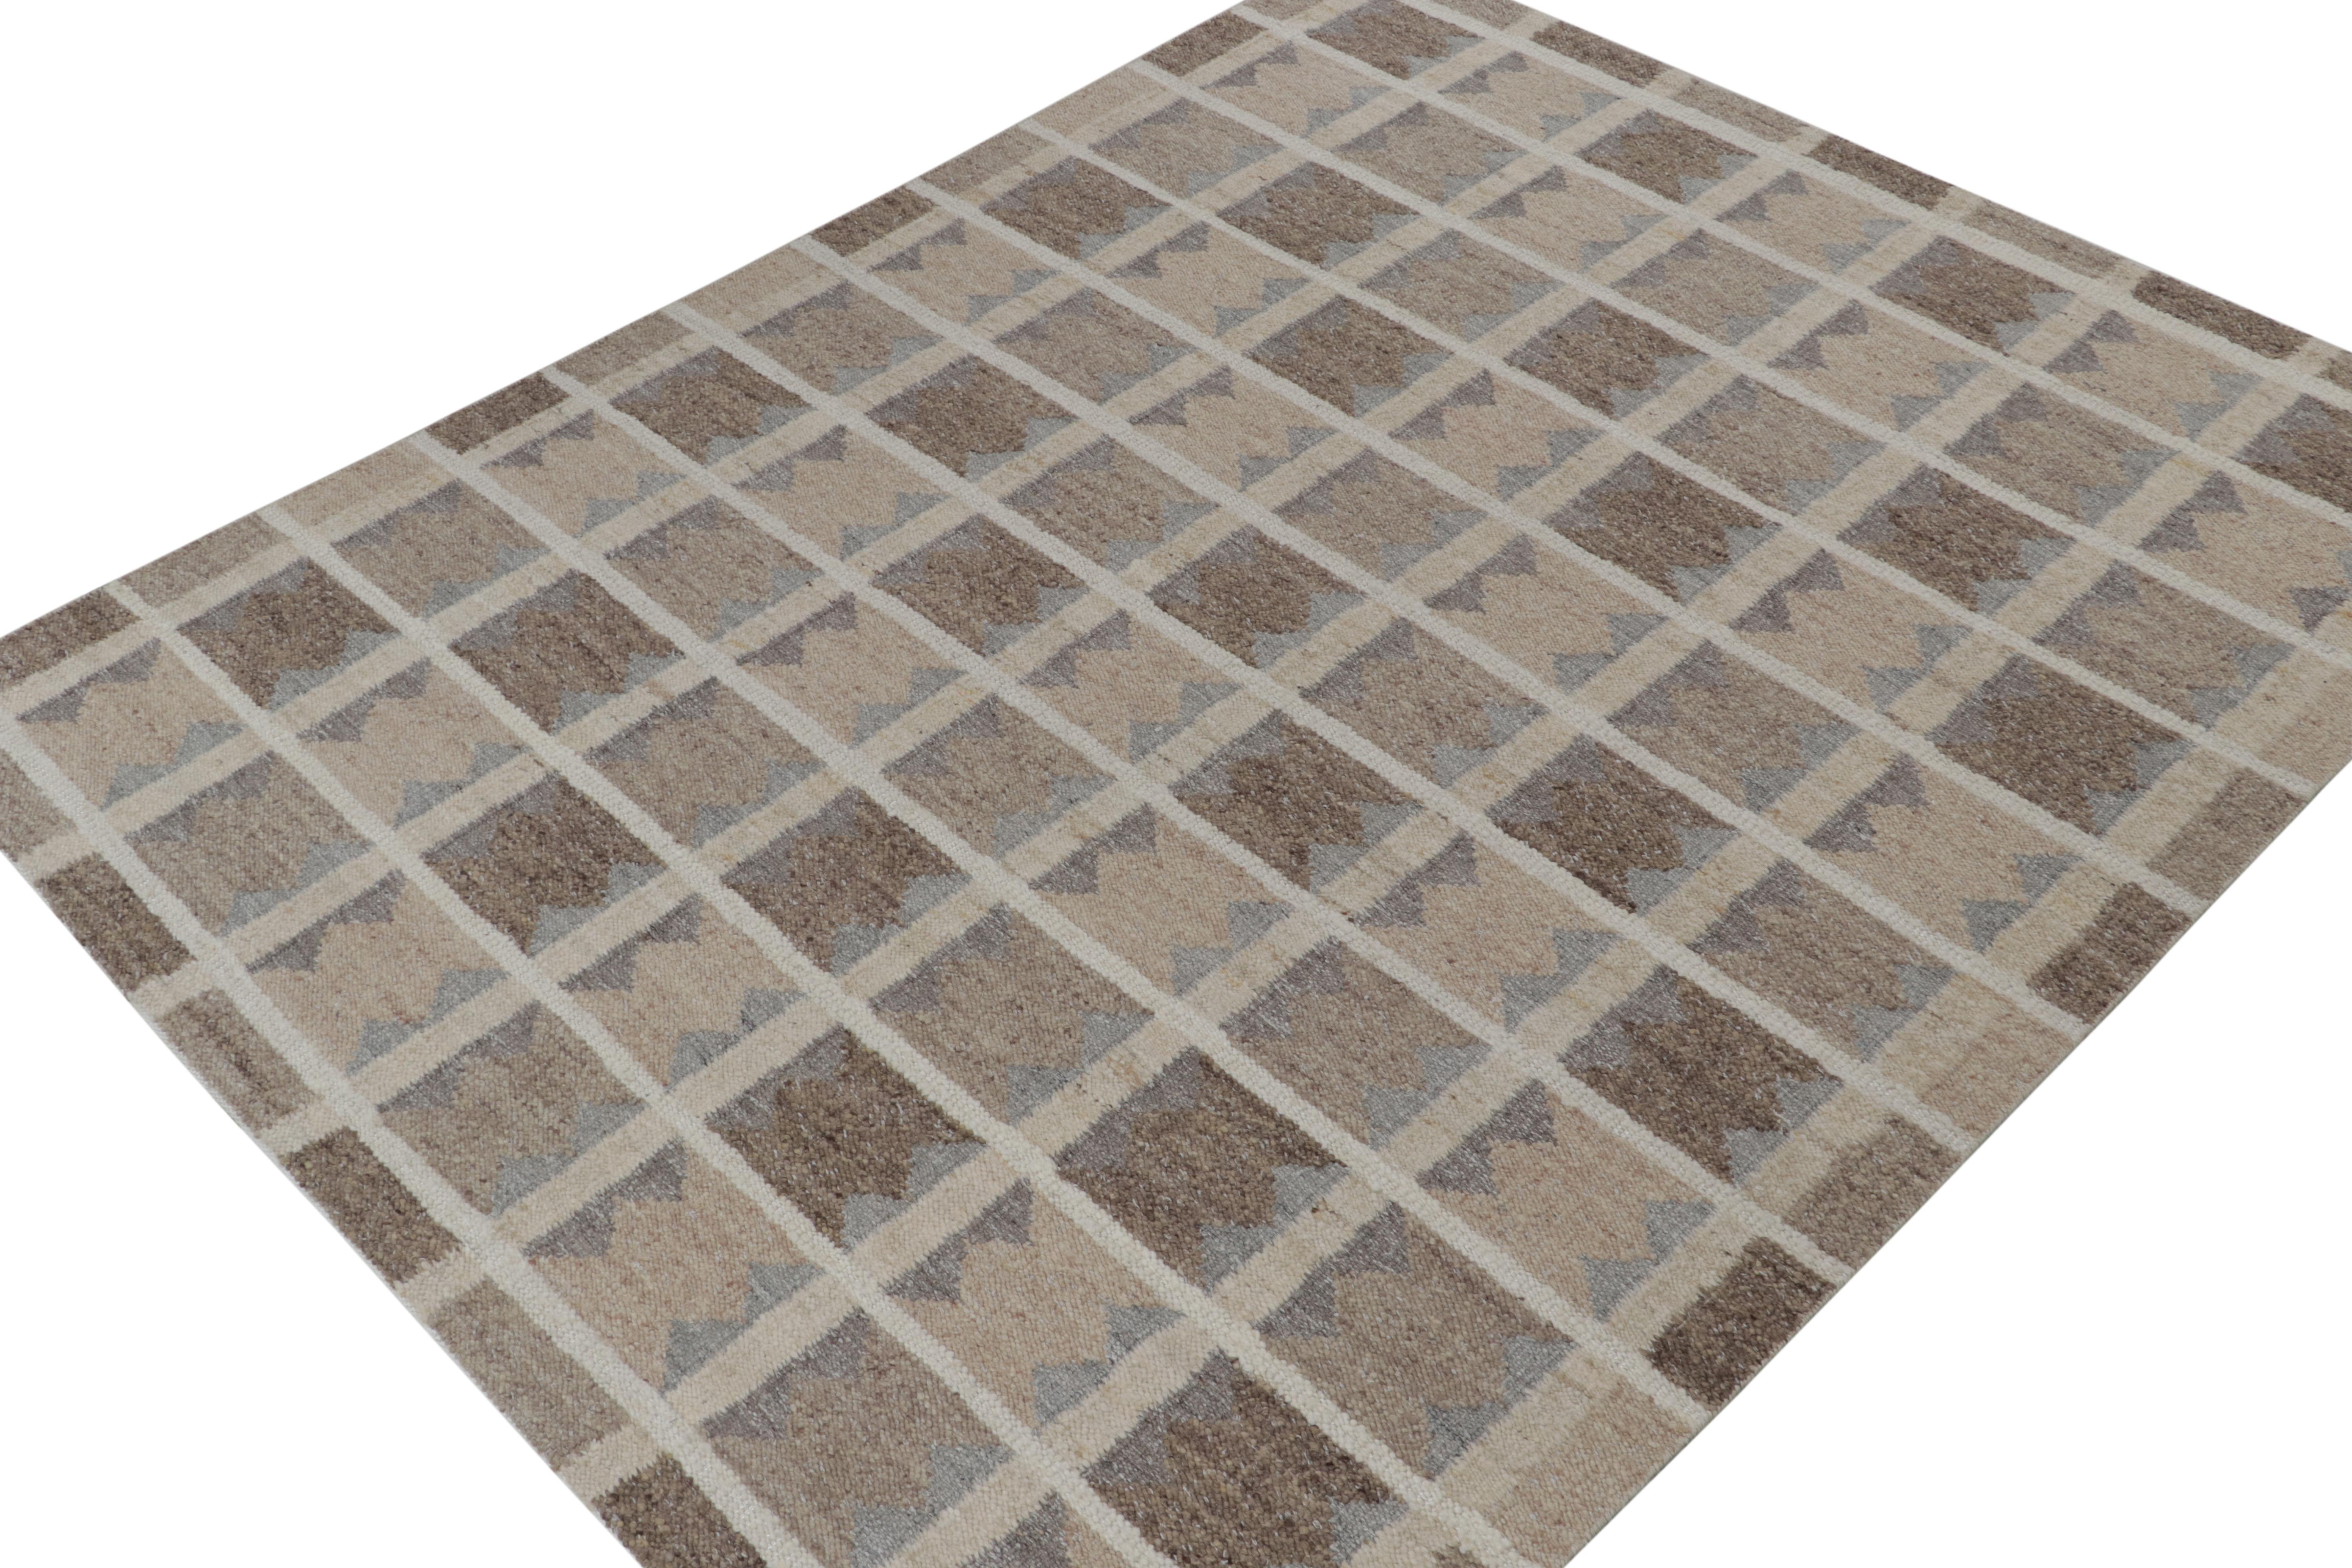 This 9x12 Swedish style kilim is from the inventive “Nu” texture in Rug & Kilim’s award-winning Scandinavian flat weave collection. Handwoven in wool. 

Further on the Design: 

This rug enjoys a boucle-like texture of blended yarns, and a look both